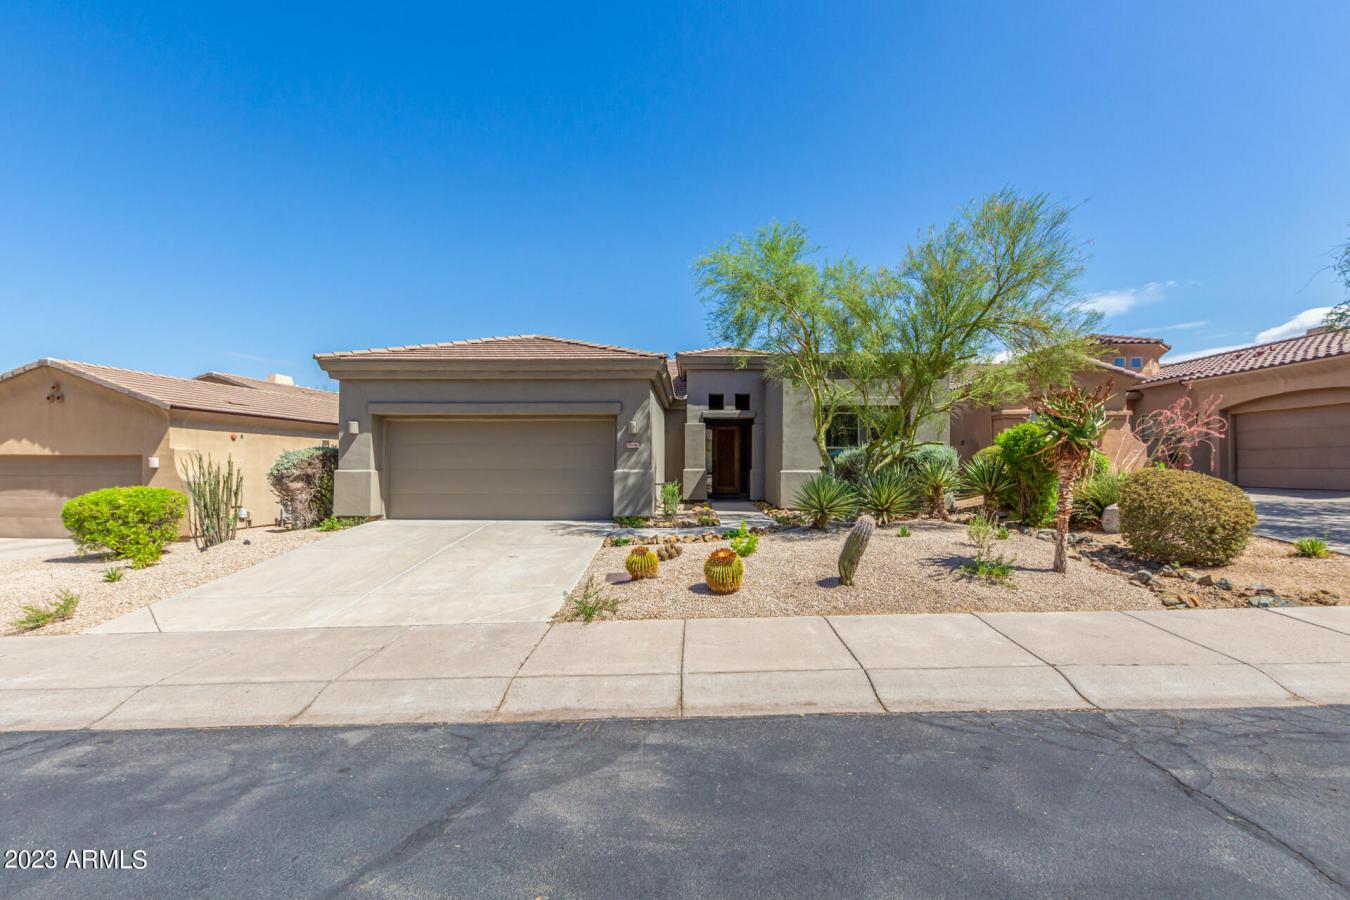 7278 E EAGLE FEATHER Road, Scottsdale, Arizona, 85266, United States, 3 Bedrooms Bedrooms, ,3 BathroomsBathrooms,Residential,For Sale,7278 E EAGLE FEATHER Road,1322192